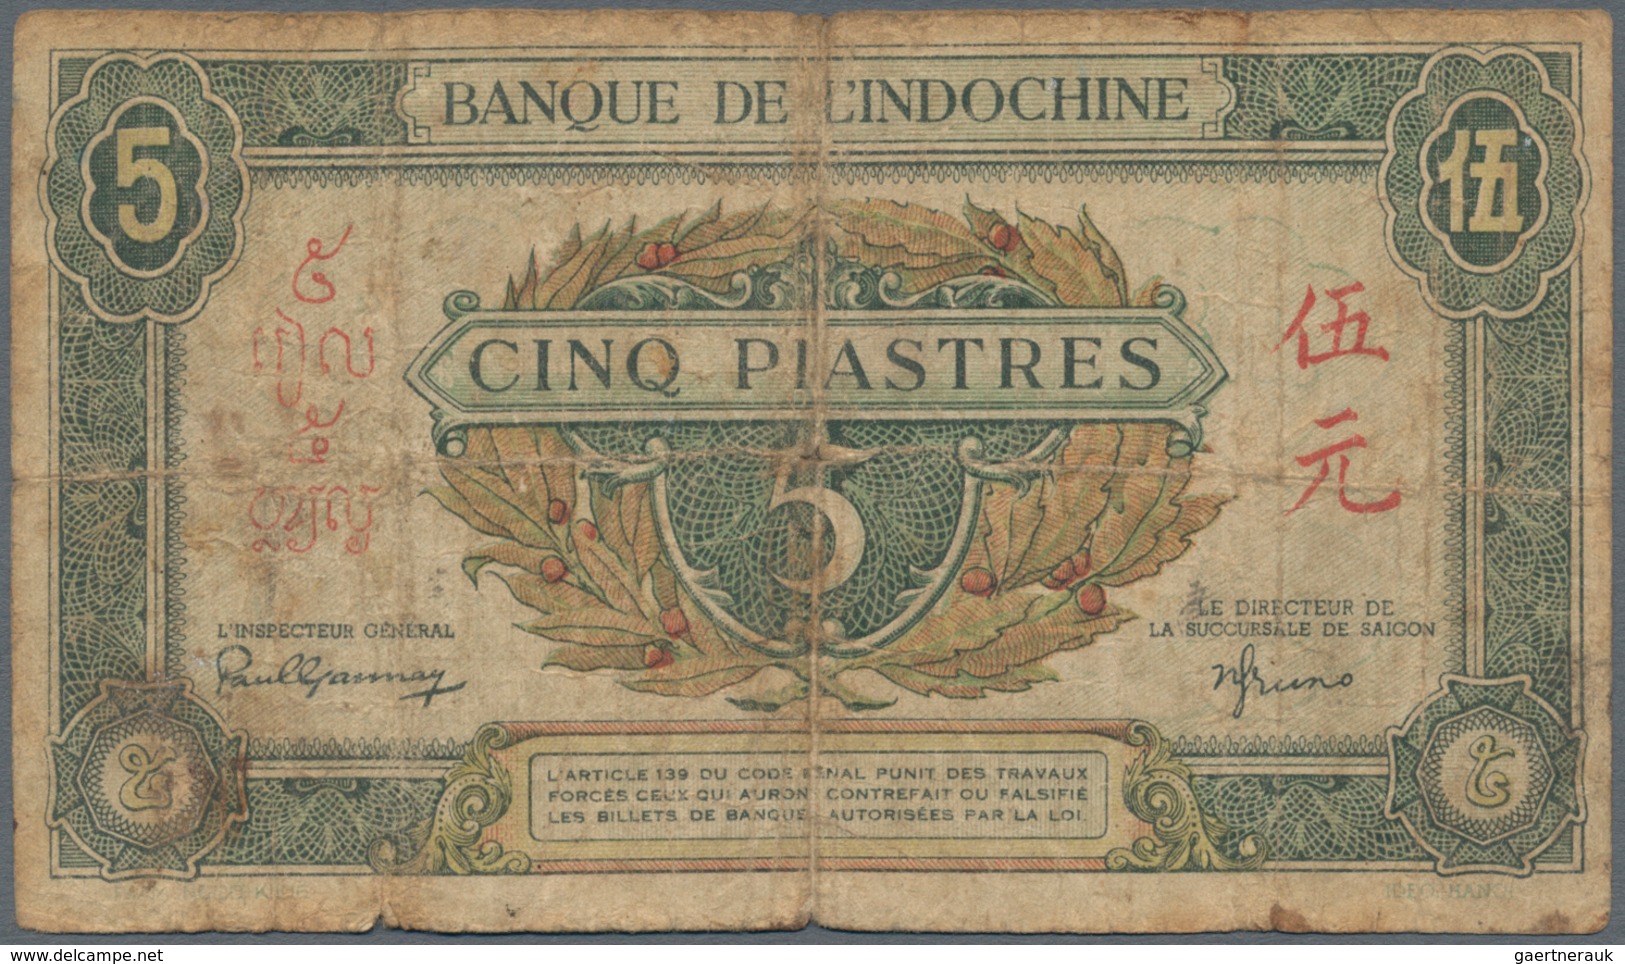 French Indochina / Französisch Indochina: Banque de l'Indo-Chine, very nice lot with 17 banknotes of